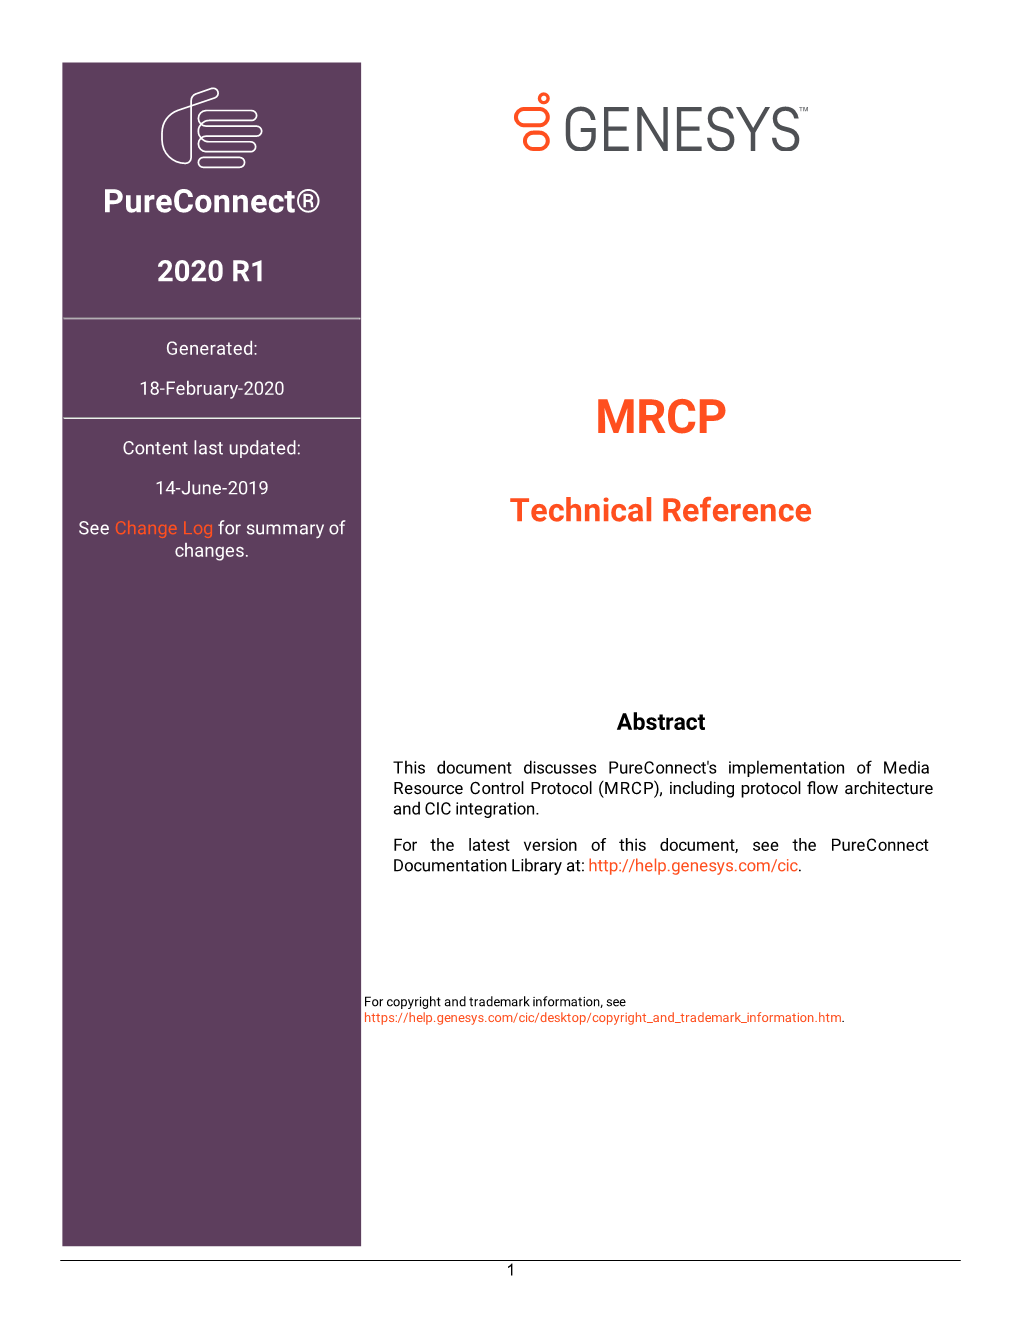 MRCP Technical Reference